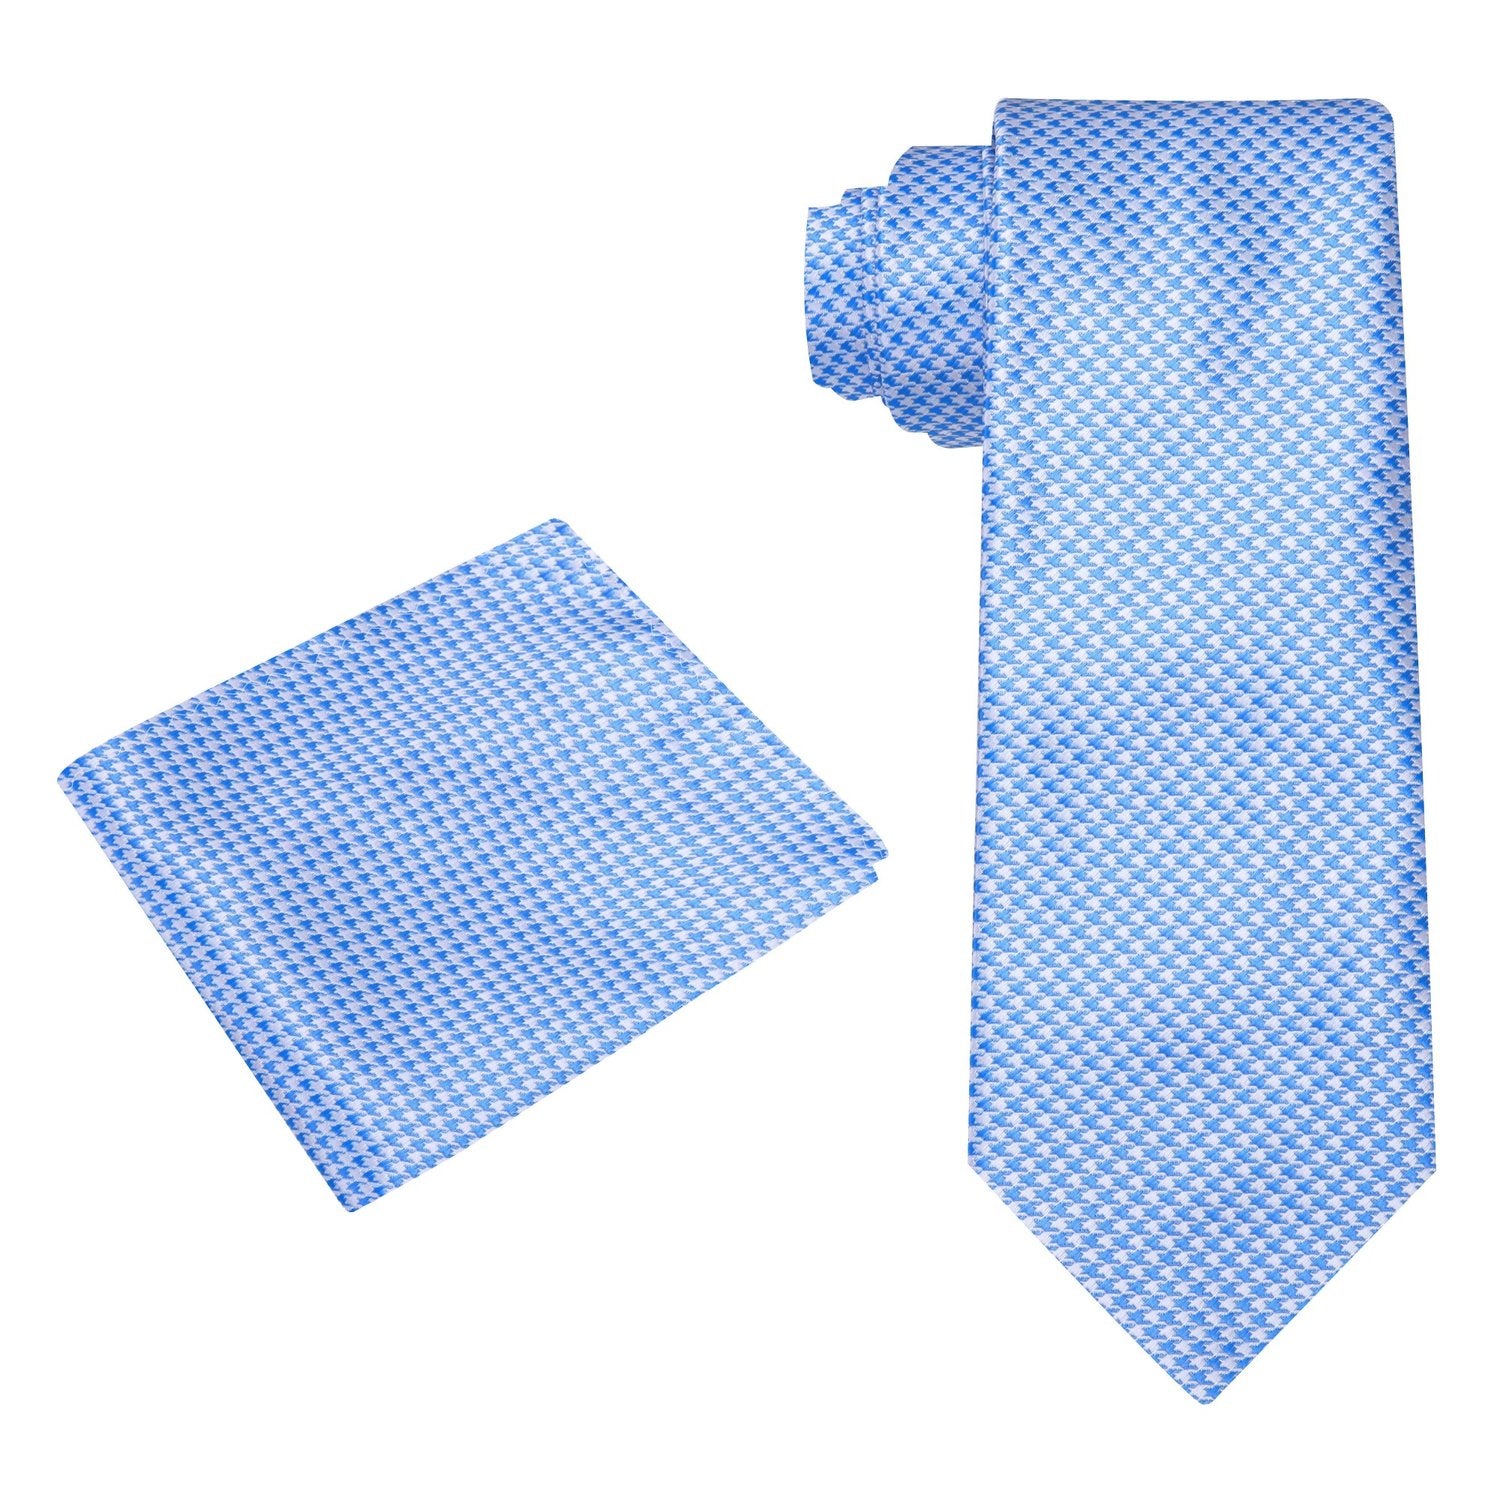 Alt View: Light Blue Hounds Tooth Tie and Pocket Square